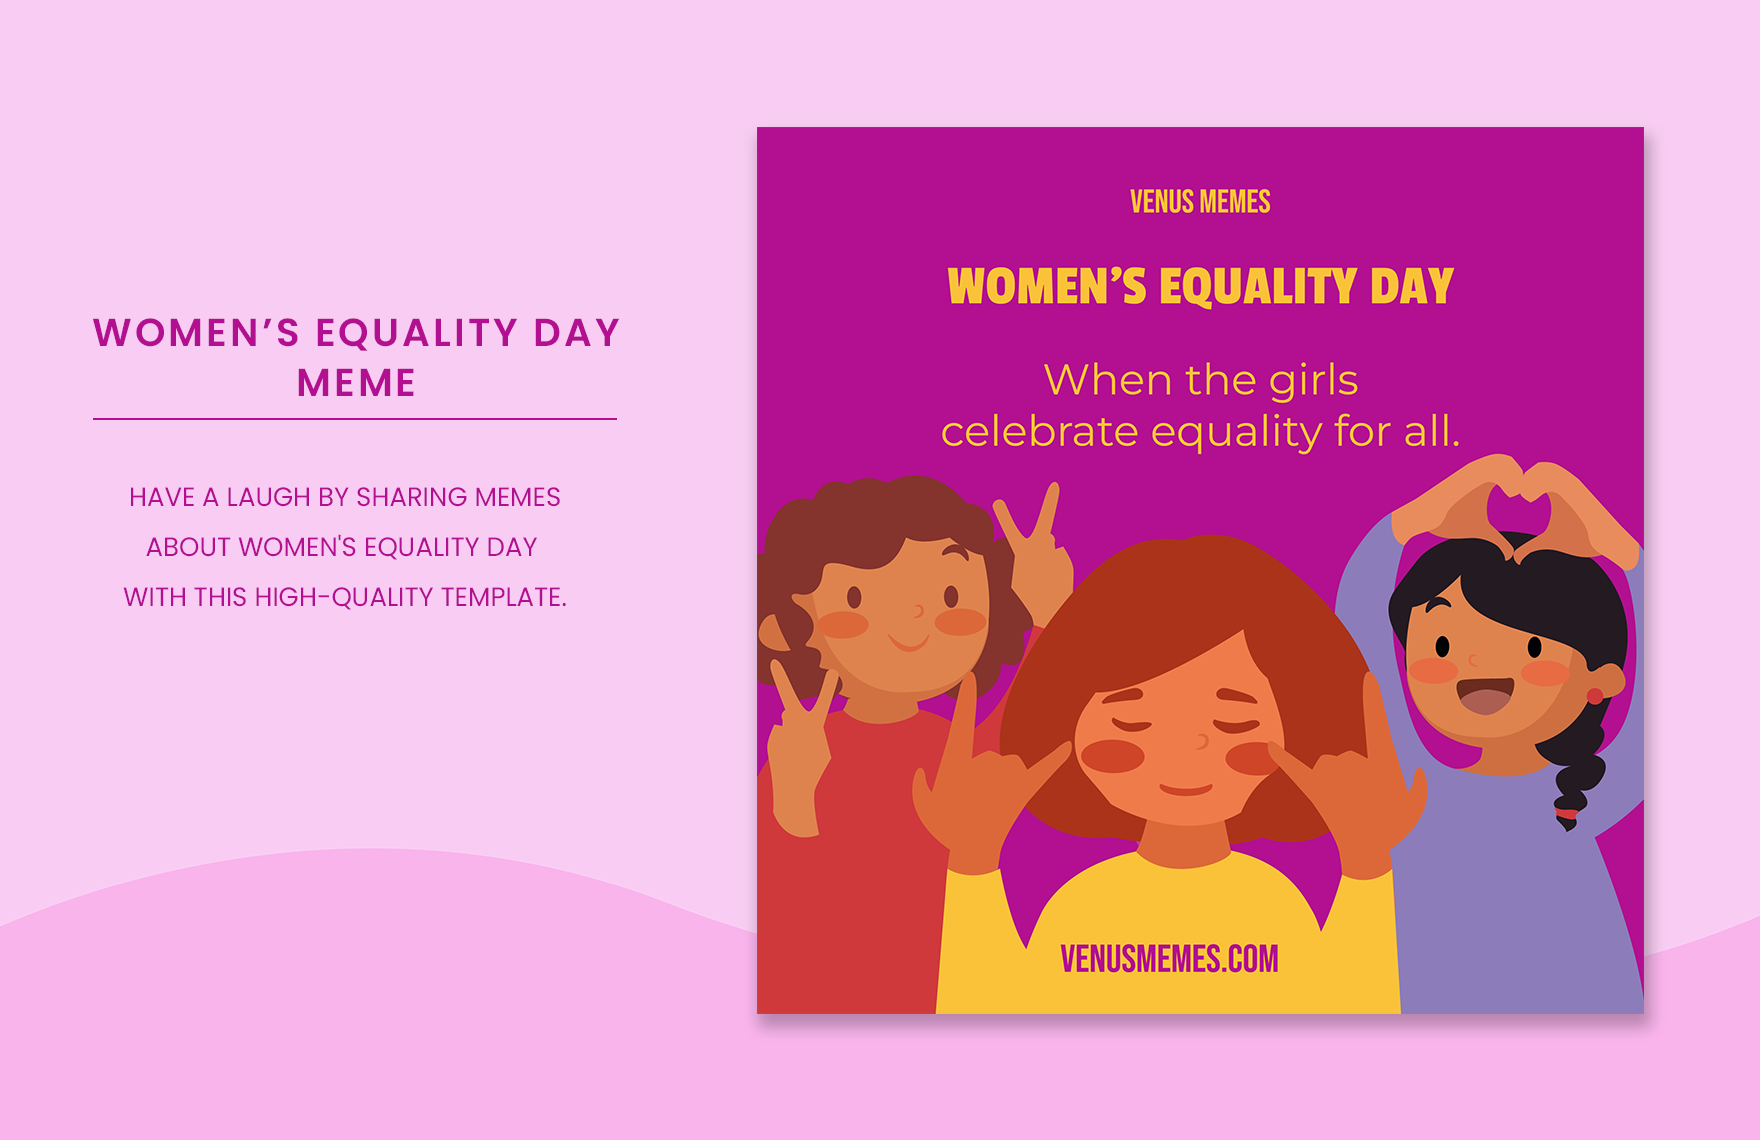 Women's Equality Day Meme